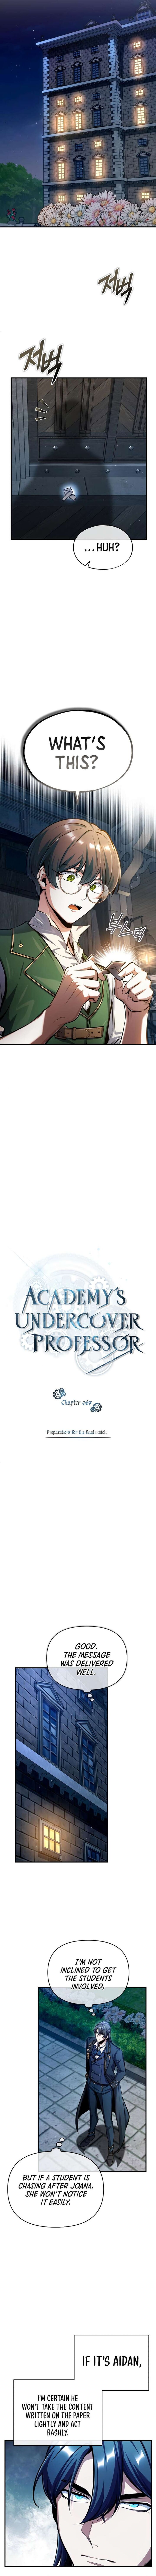 Academys Undercover Professor Chapter 67 Page 6